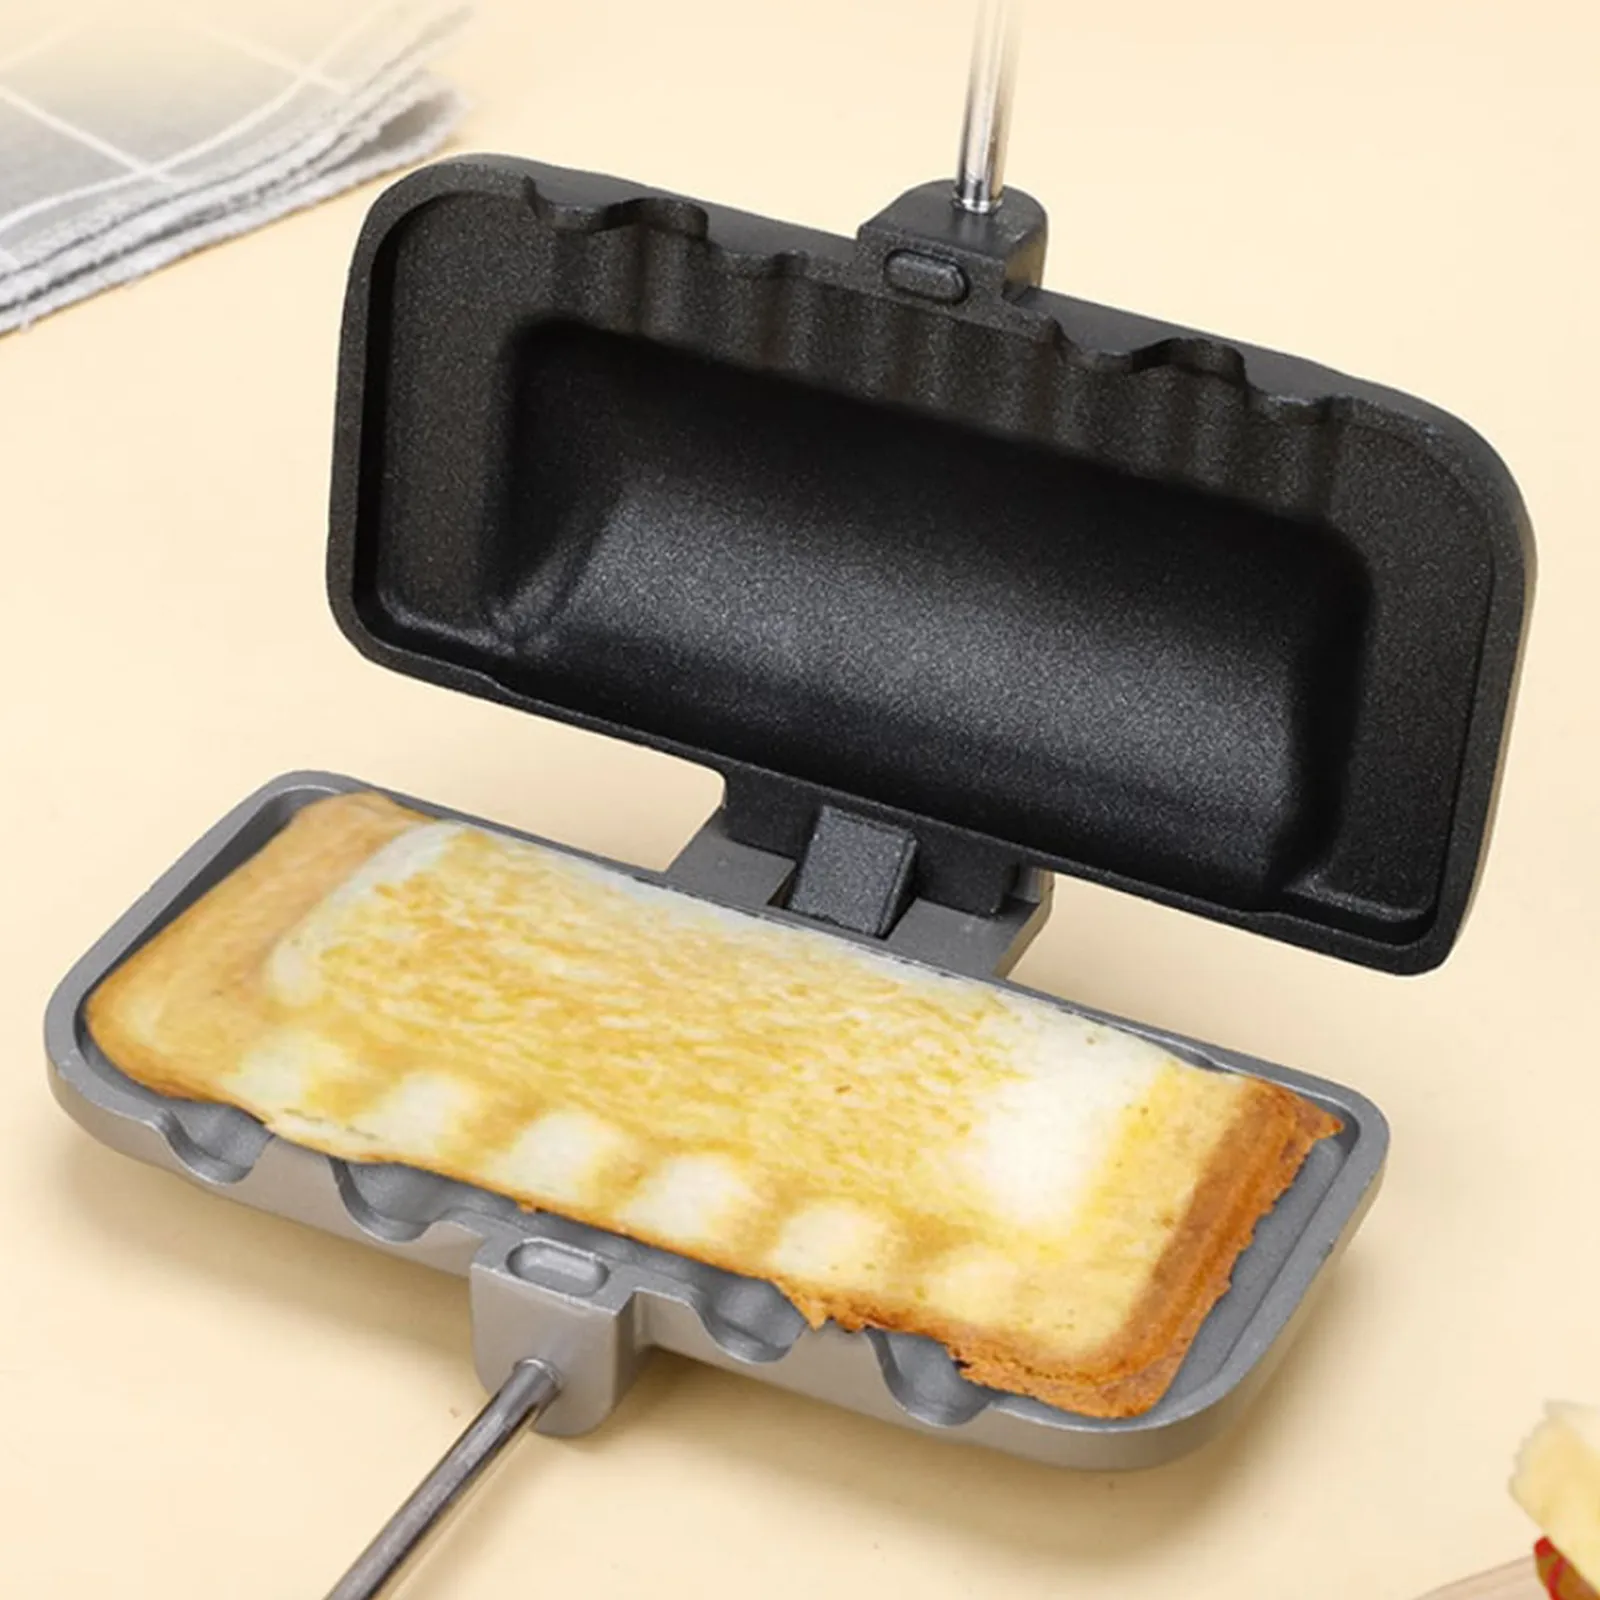 https://ae01.alicdn.com/kf/S4adeb70f27004d578be23cb004e14b70S/Hot-Sandwich-Maker-Hot-Dog-Toaster-Double-Sided-Sandwich-Baking-Pan-Frying-Pan-Grilled-Cheese-Maker.jpg